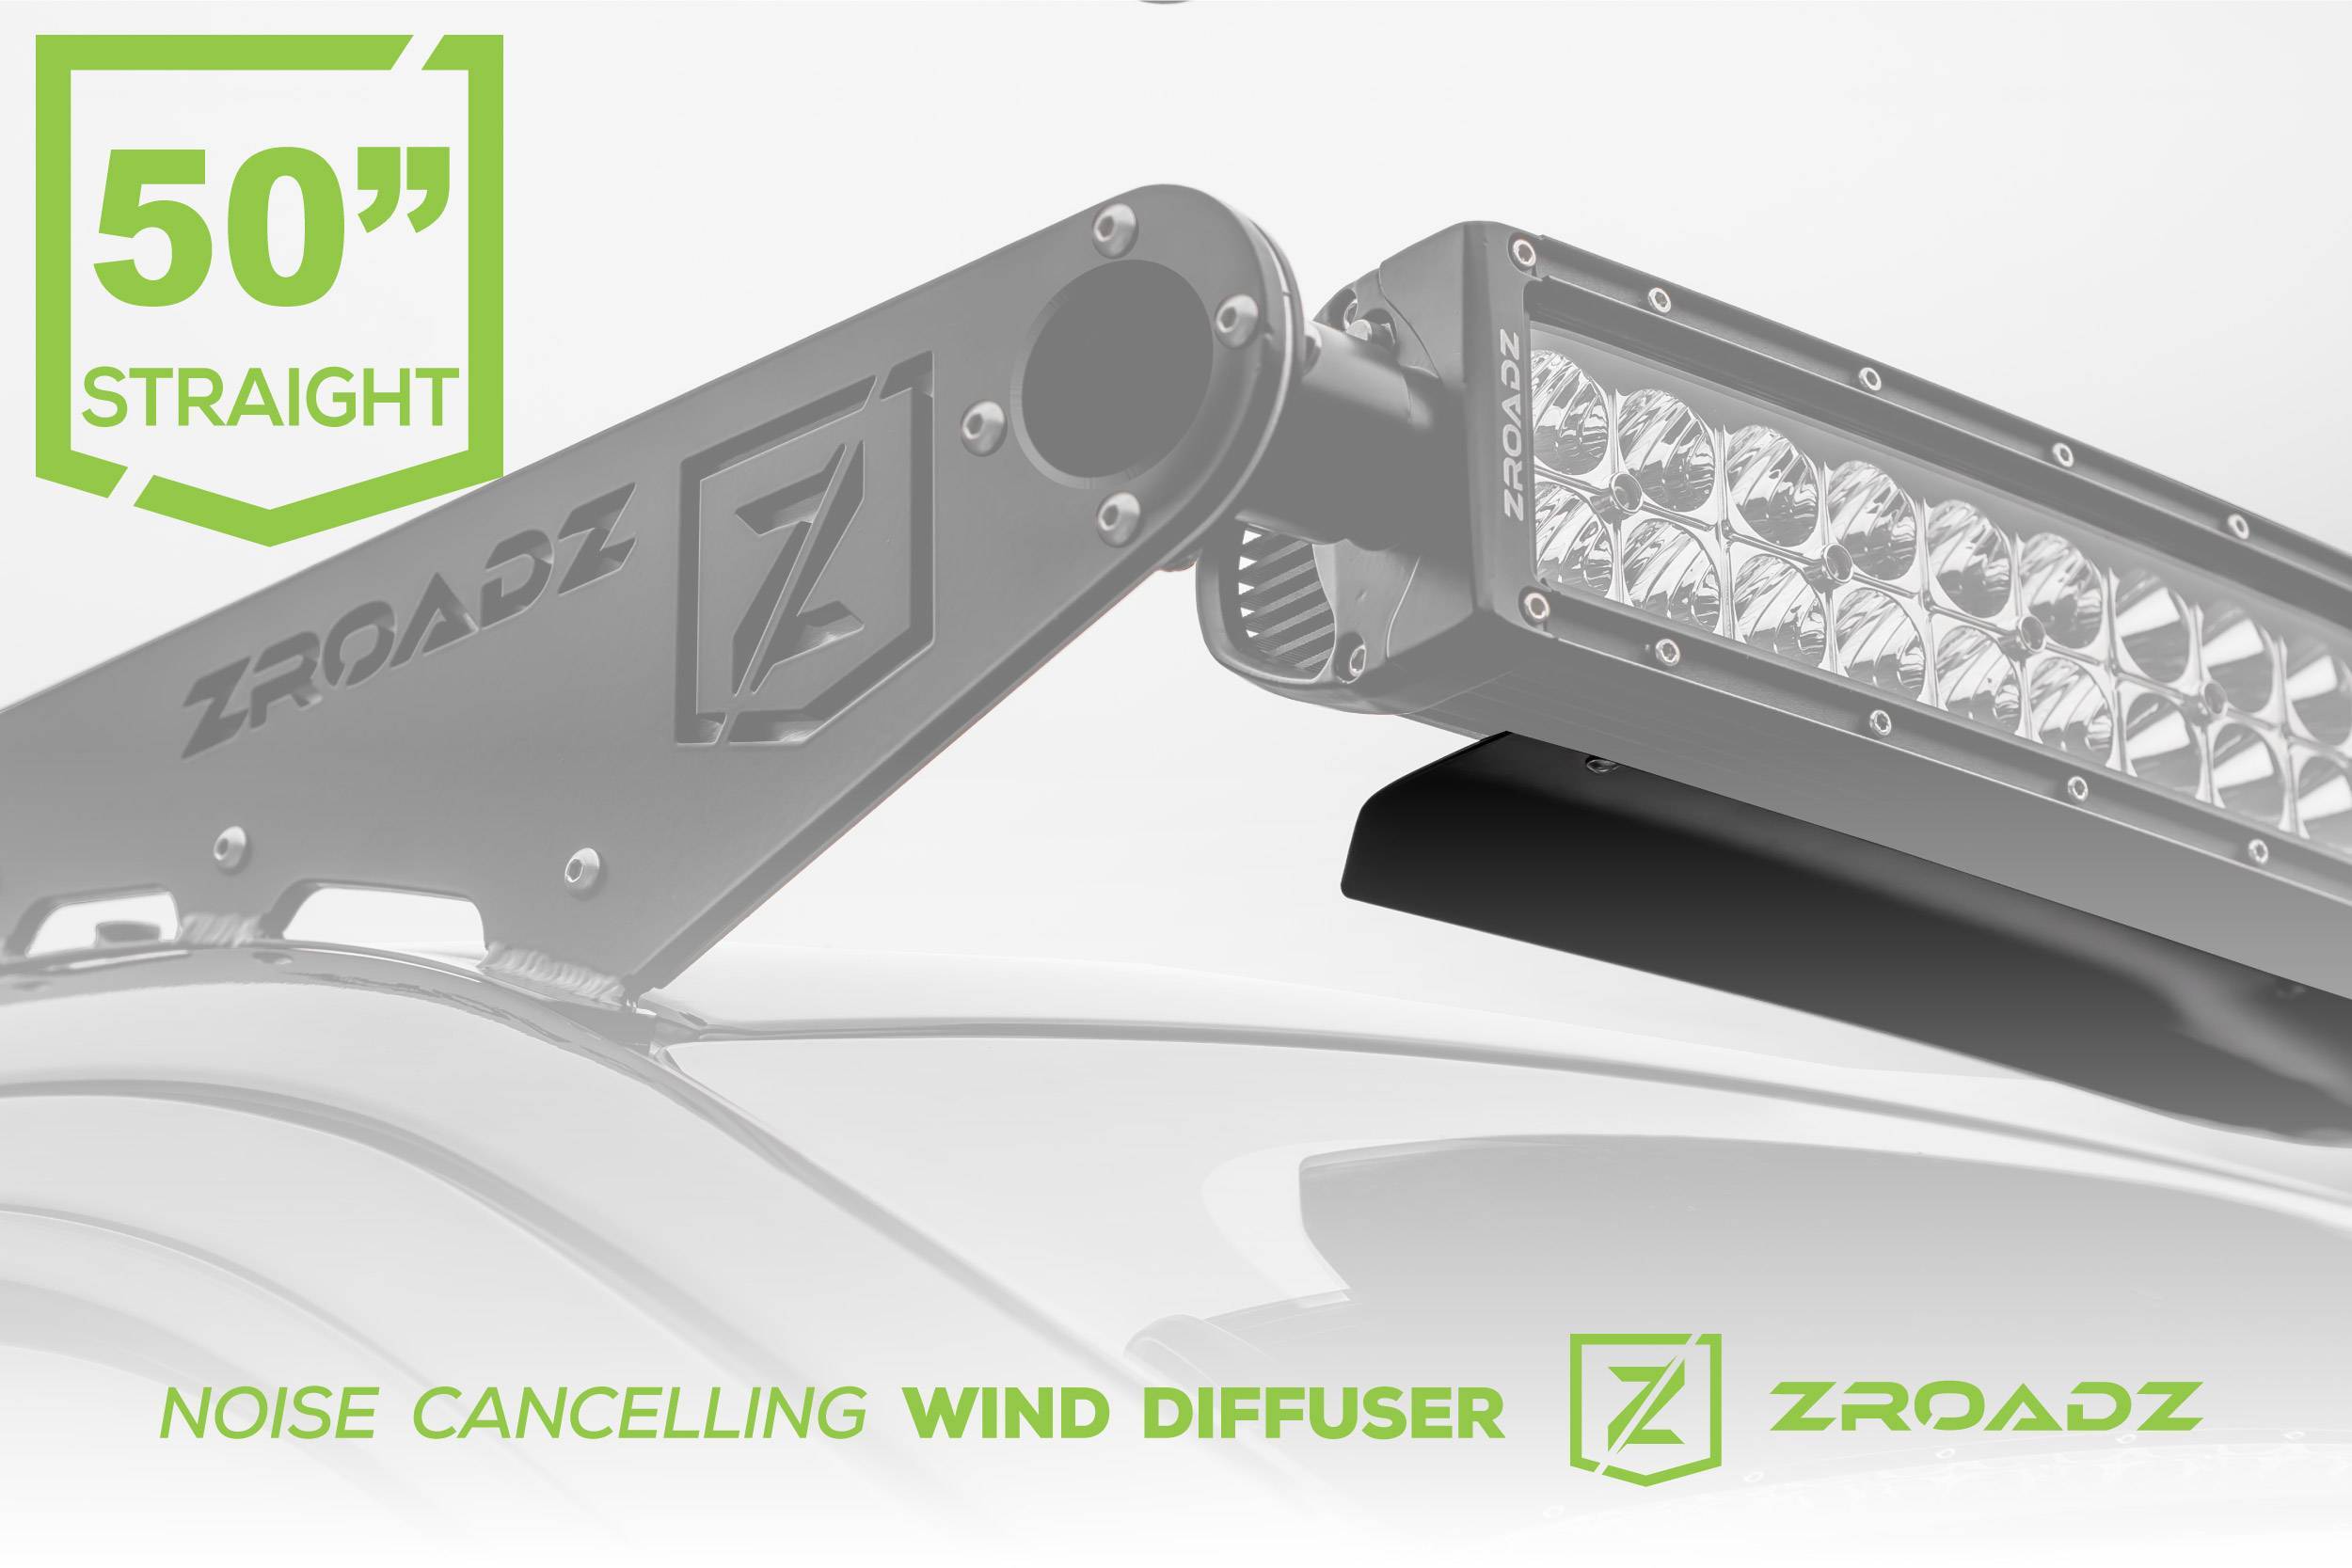 ZROADZ OFF ROAD PRODUCTS - Noise Cancelling Wind Diffuser for (1) 50 Inch Straight LED Light Bar - PN #Z330050S